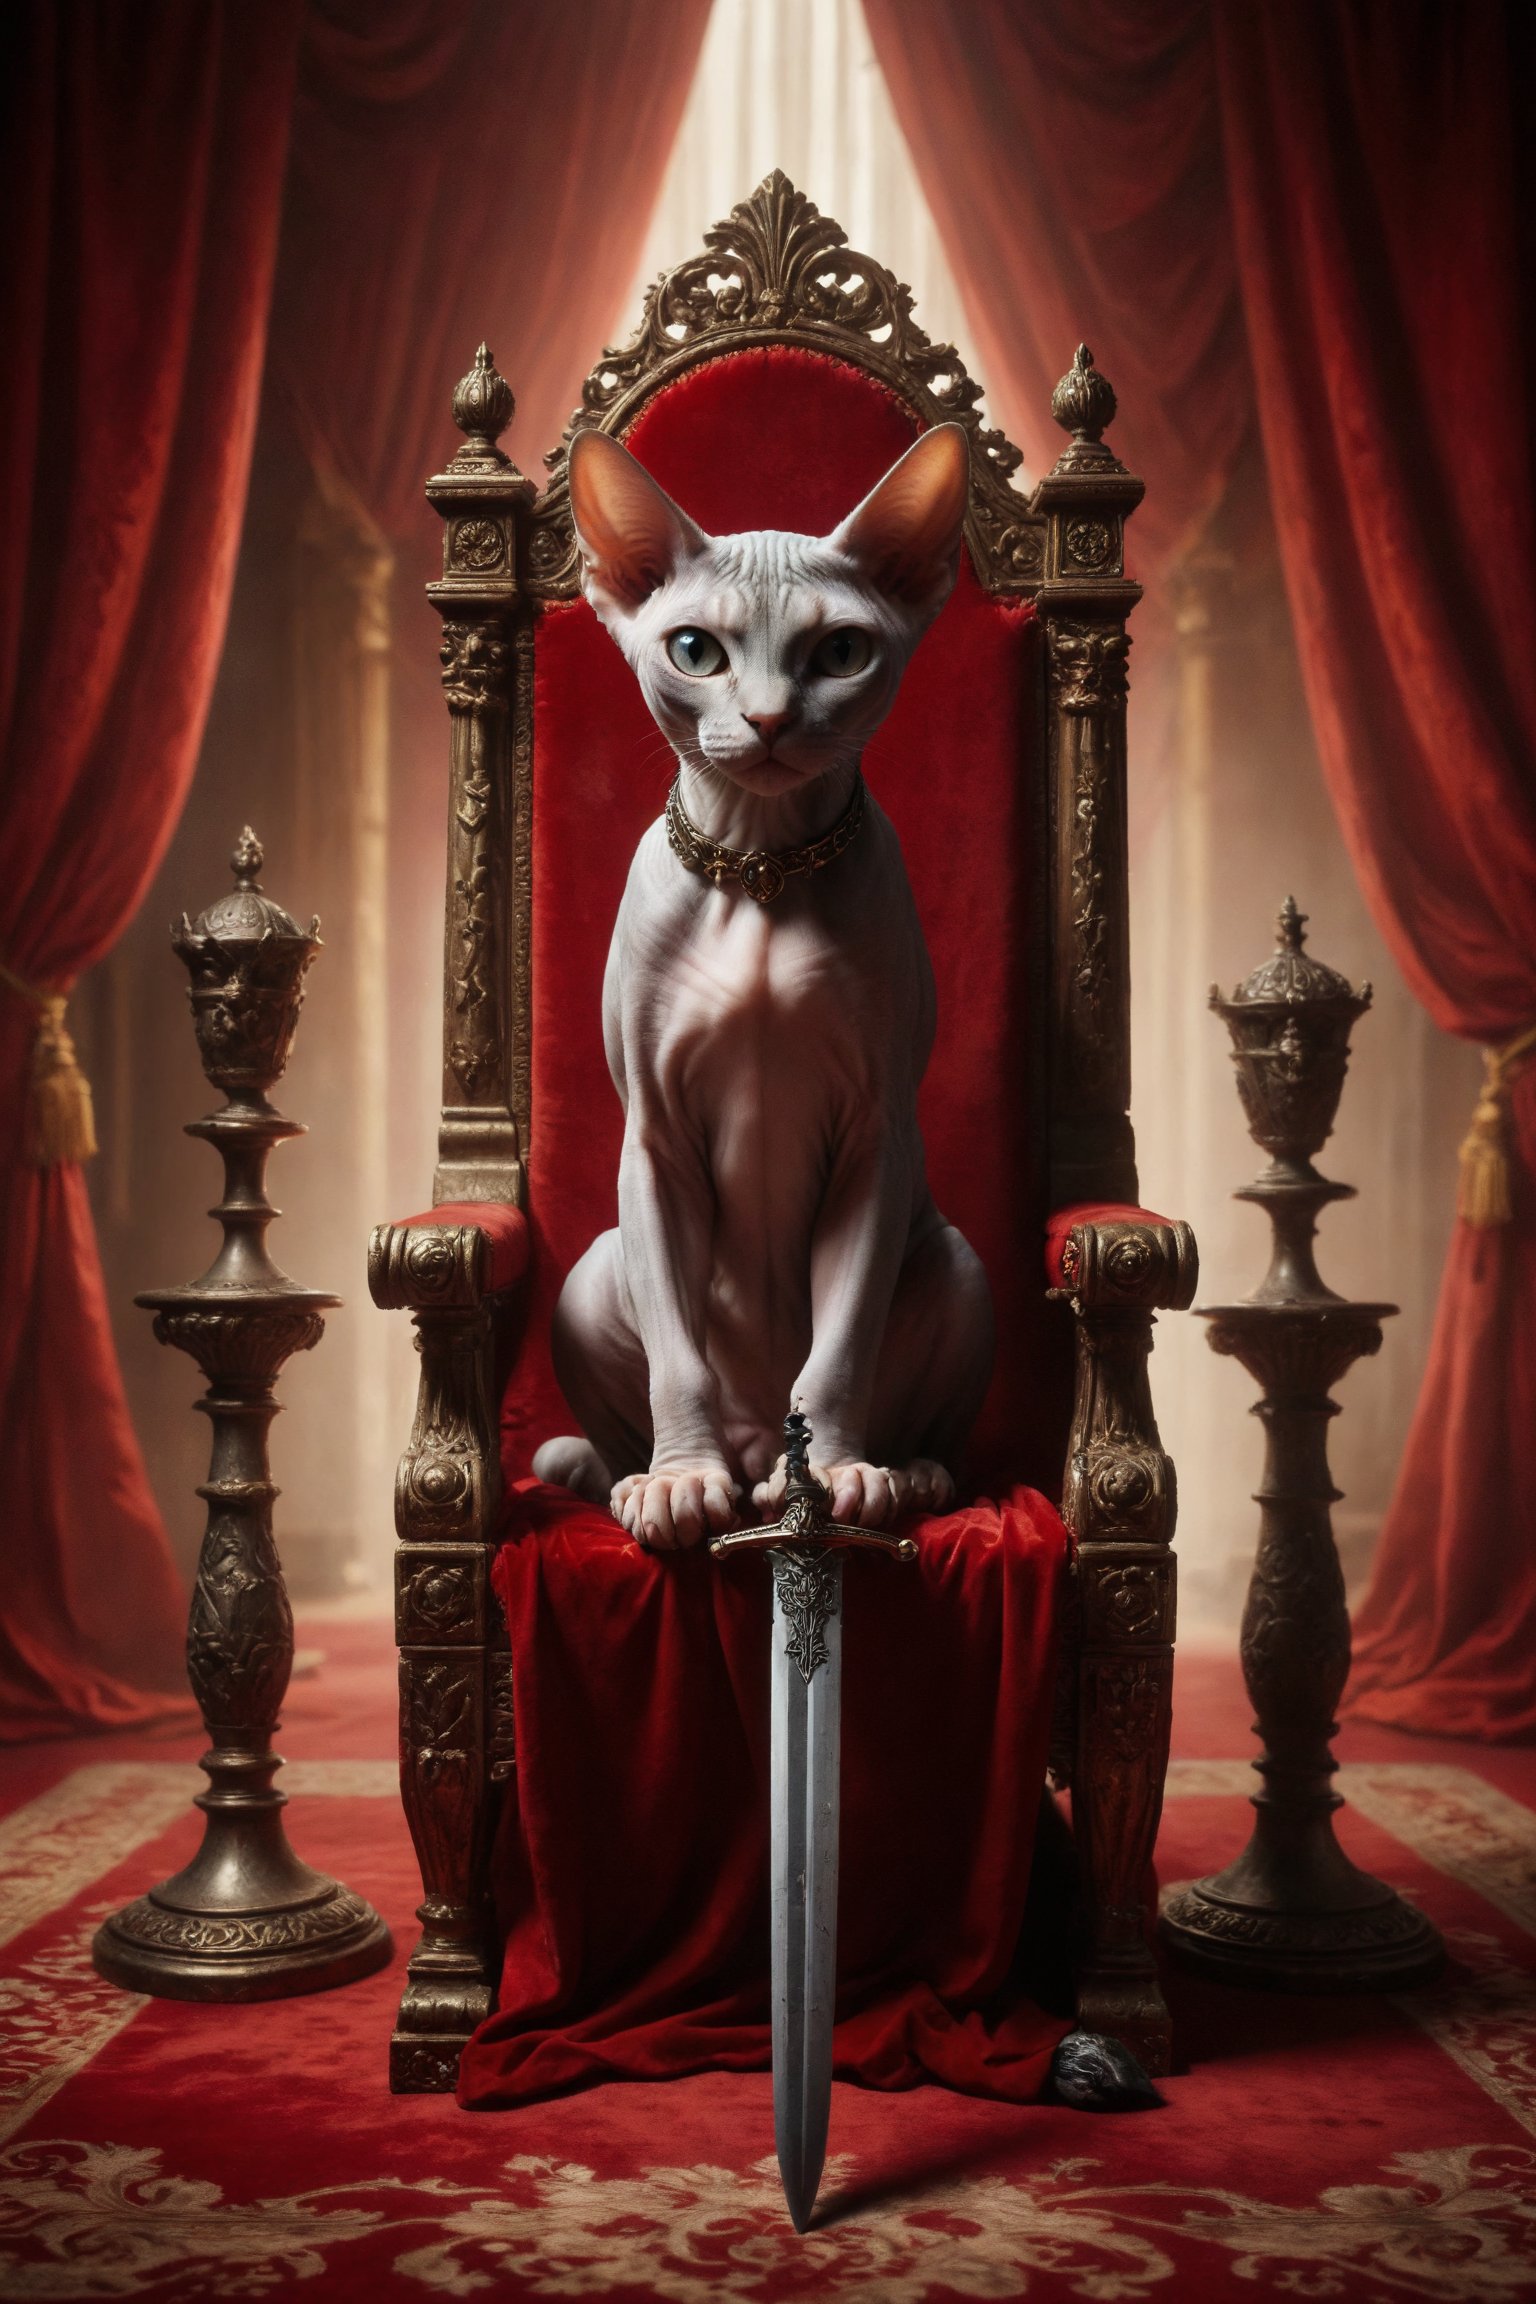 Design a scene of a Sphynx cat seated on a throne, holding a balance in one paw and a sword in the other, with a red curtain in the background, symbolizing truth, balance, and justice.